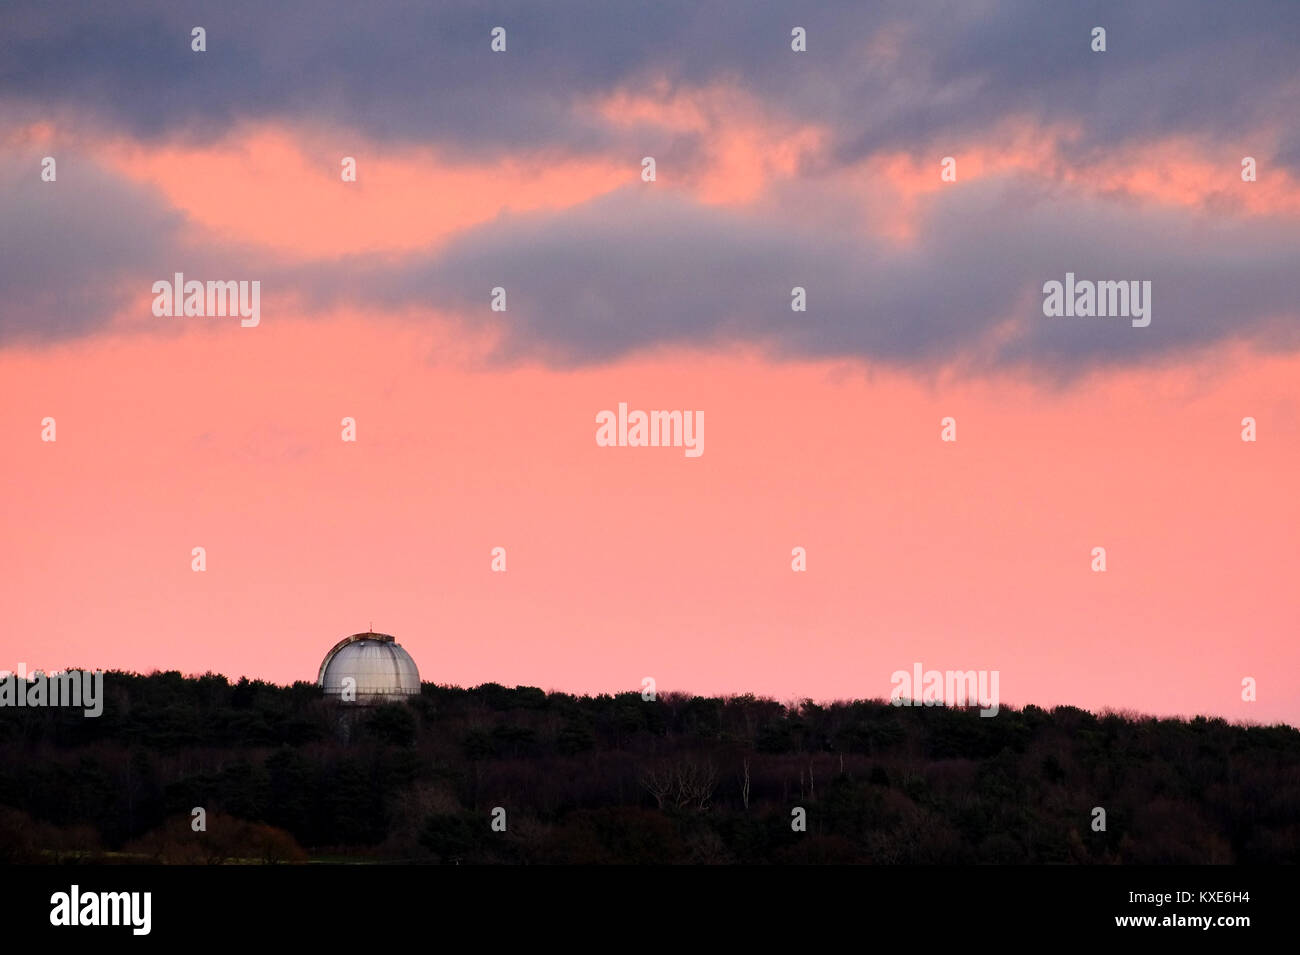 Former Royal Greenwich Observatory dome at Herstmonceux, East Sussex, at sunset. The dome housed the Isaac Newton 100 inch Telescope. Stock Photo